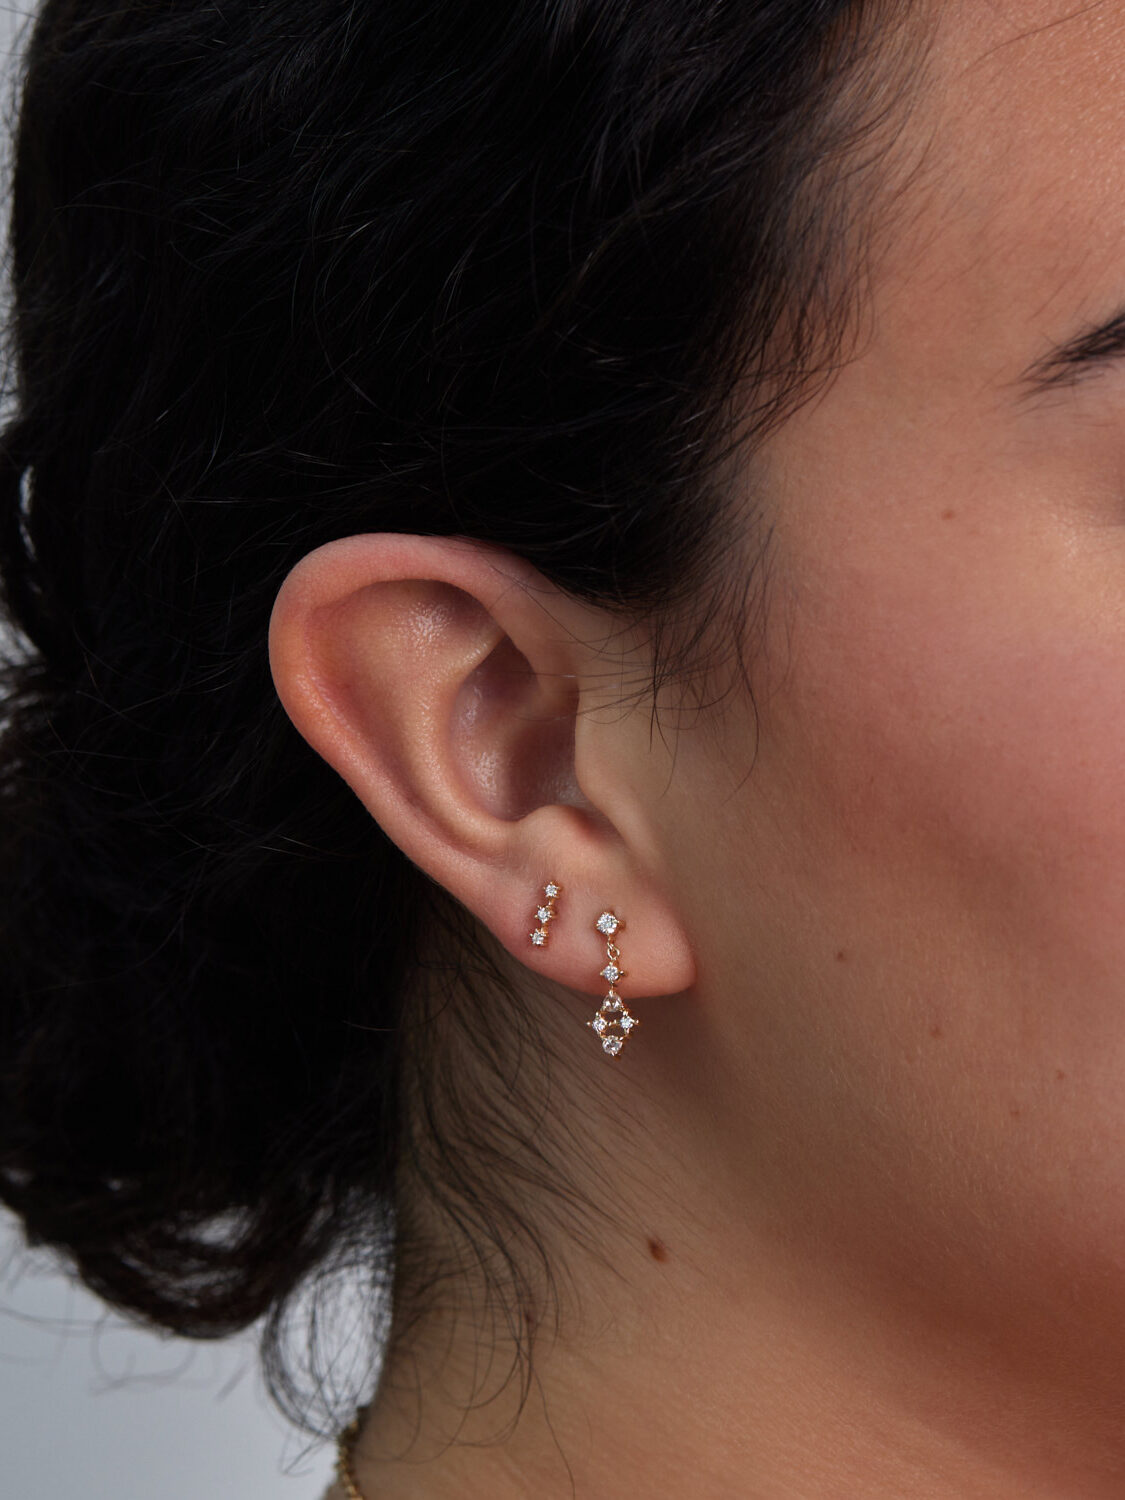 Close-up of a woman’s ear adorned with three delicate gold earrings, featuring small gems and star-shaped pendants.